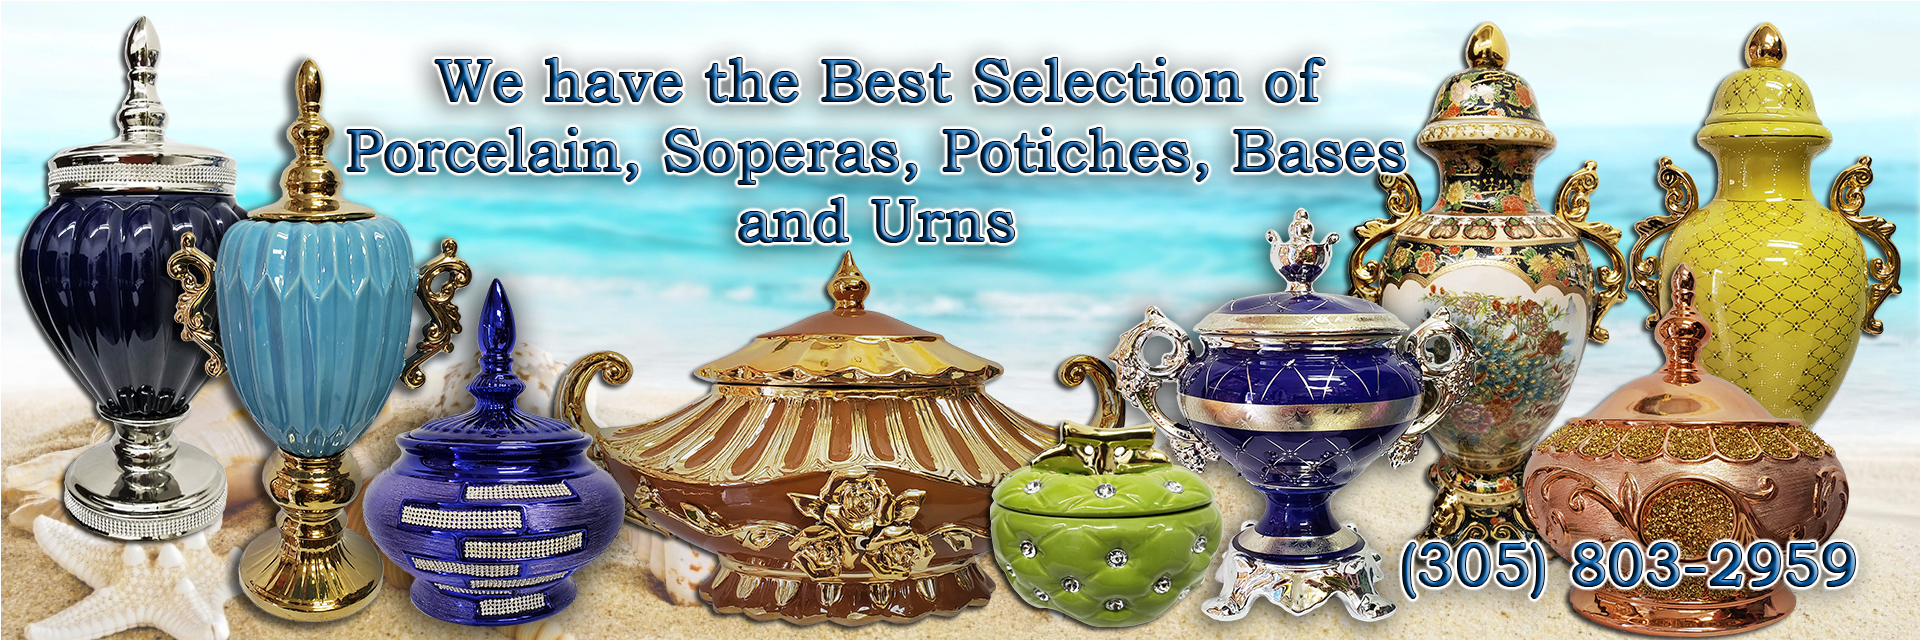 We have the Best Selection of Porcelain, Soperas, Potiches, Bases and Urns